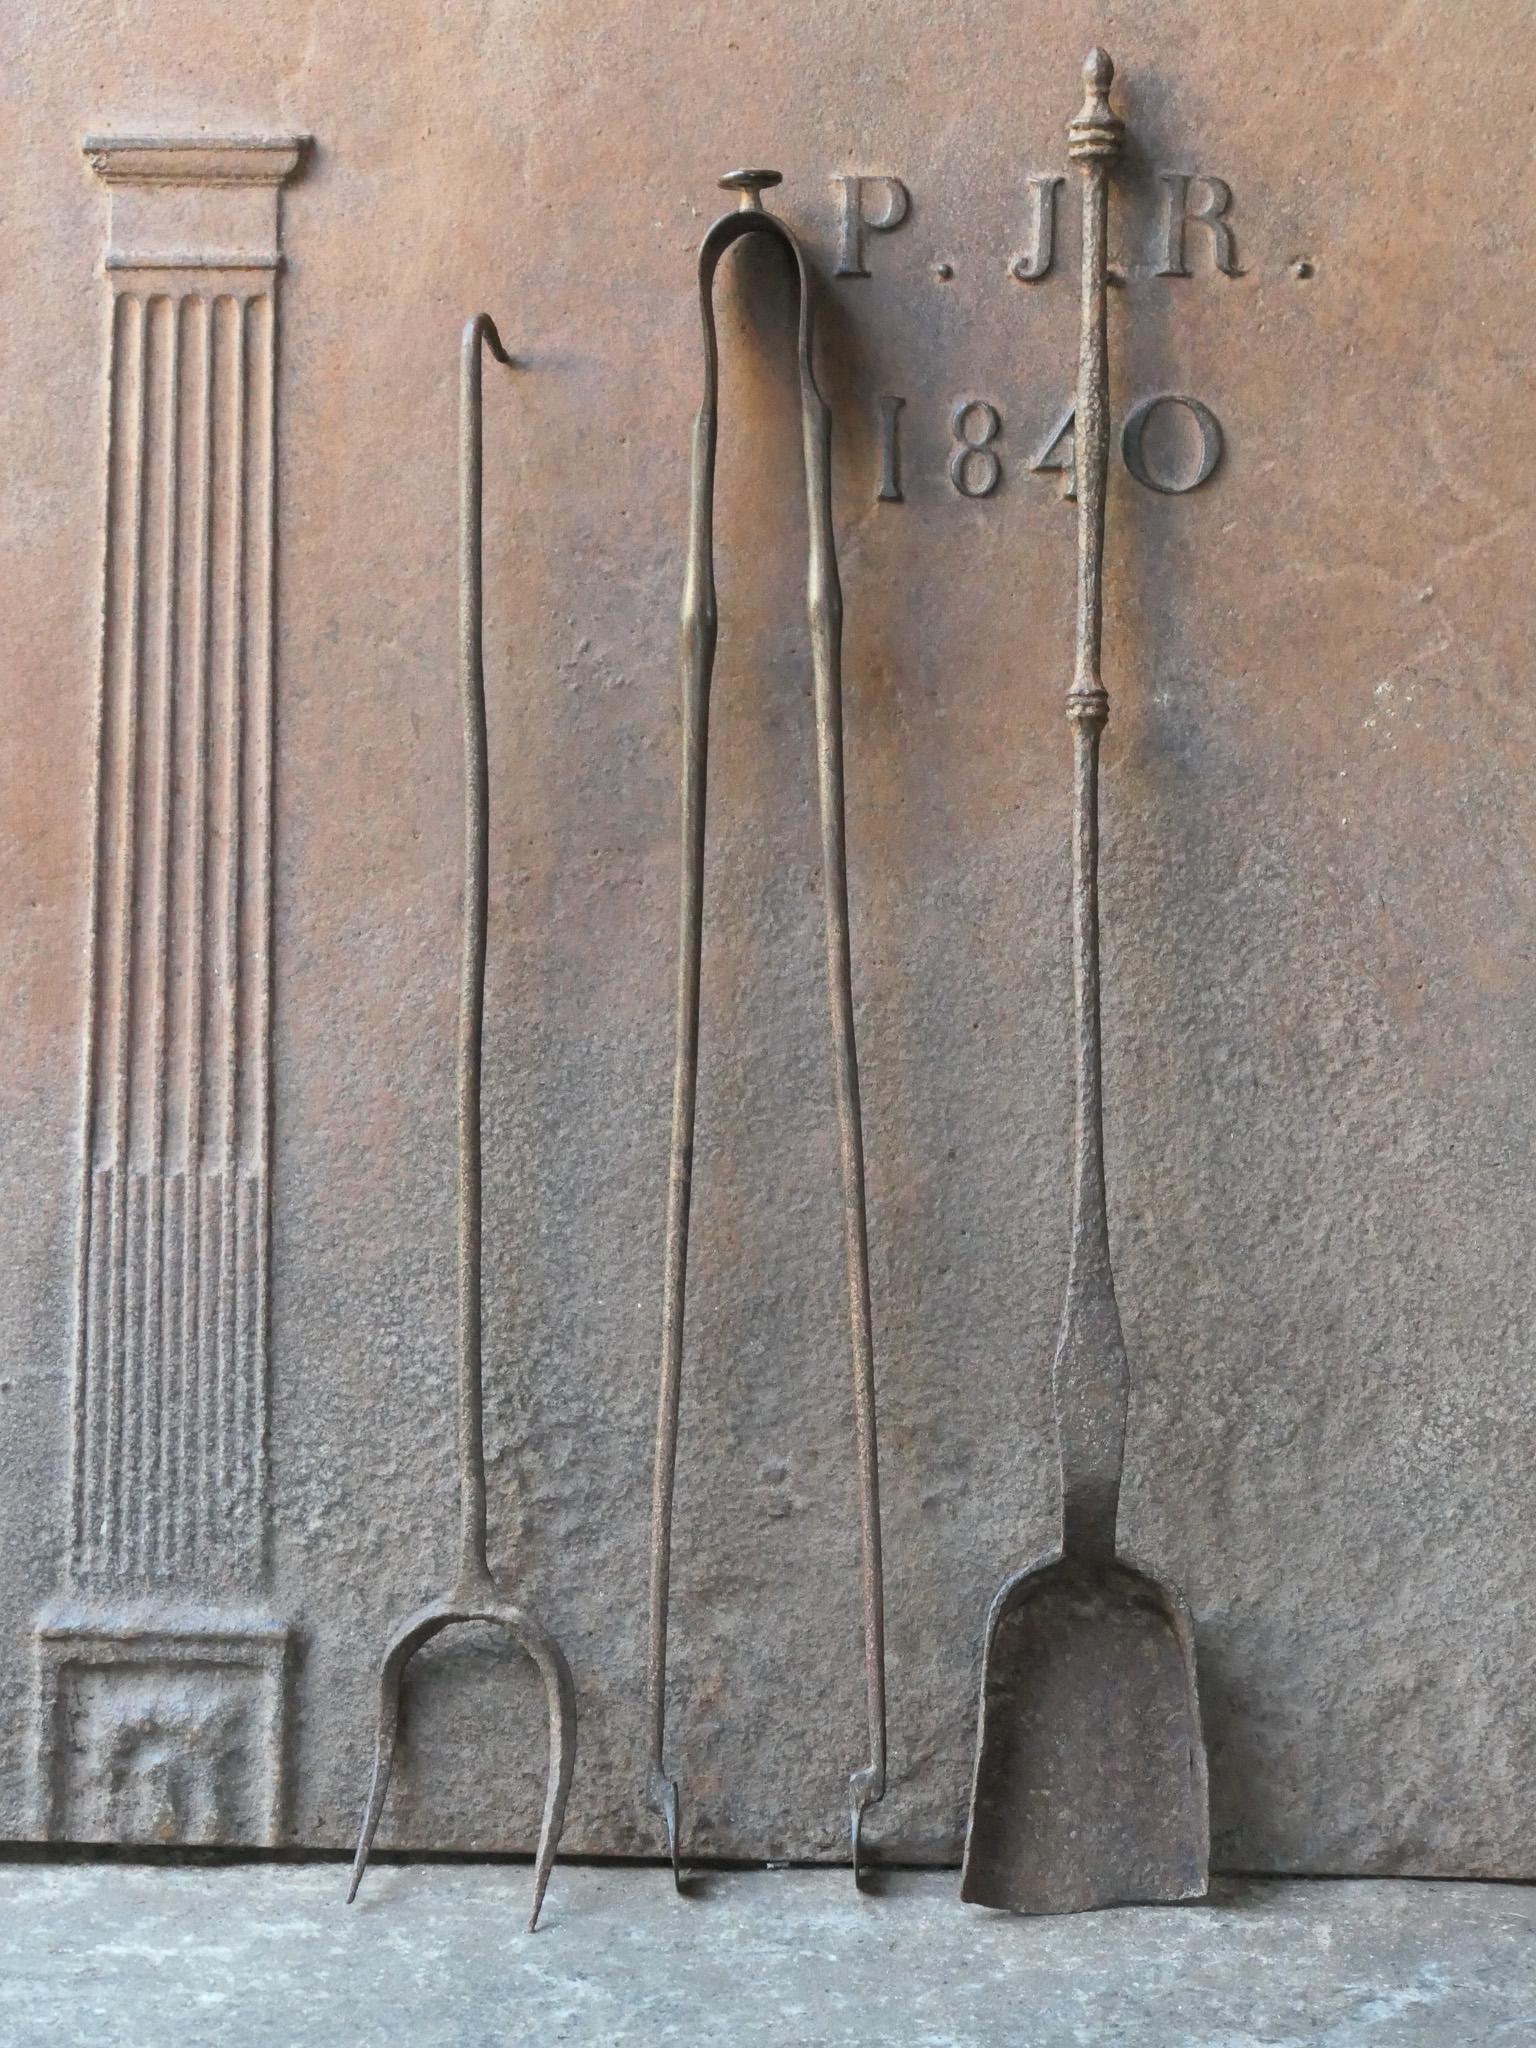 Rustic 17th-18th century French fireplace tool set. The tool set consists of fireplace tongs, shovel and a fire fork. The tools are made of wrought iron. The set is in a good condition and fit for use in the fireplace.